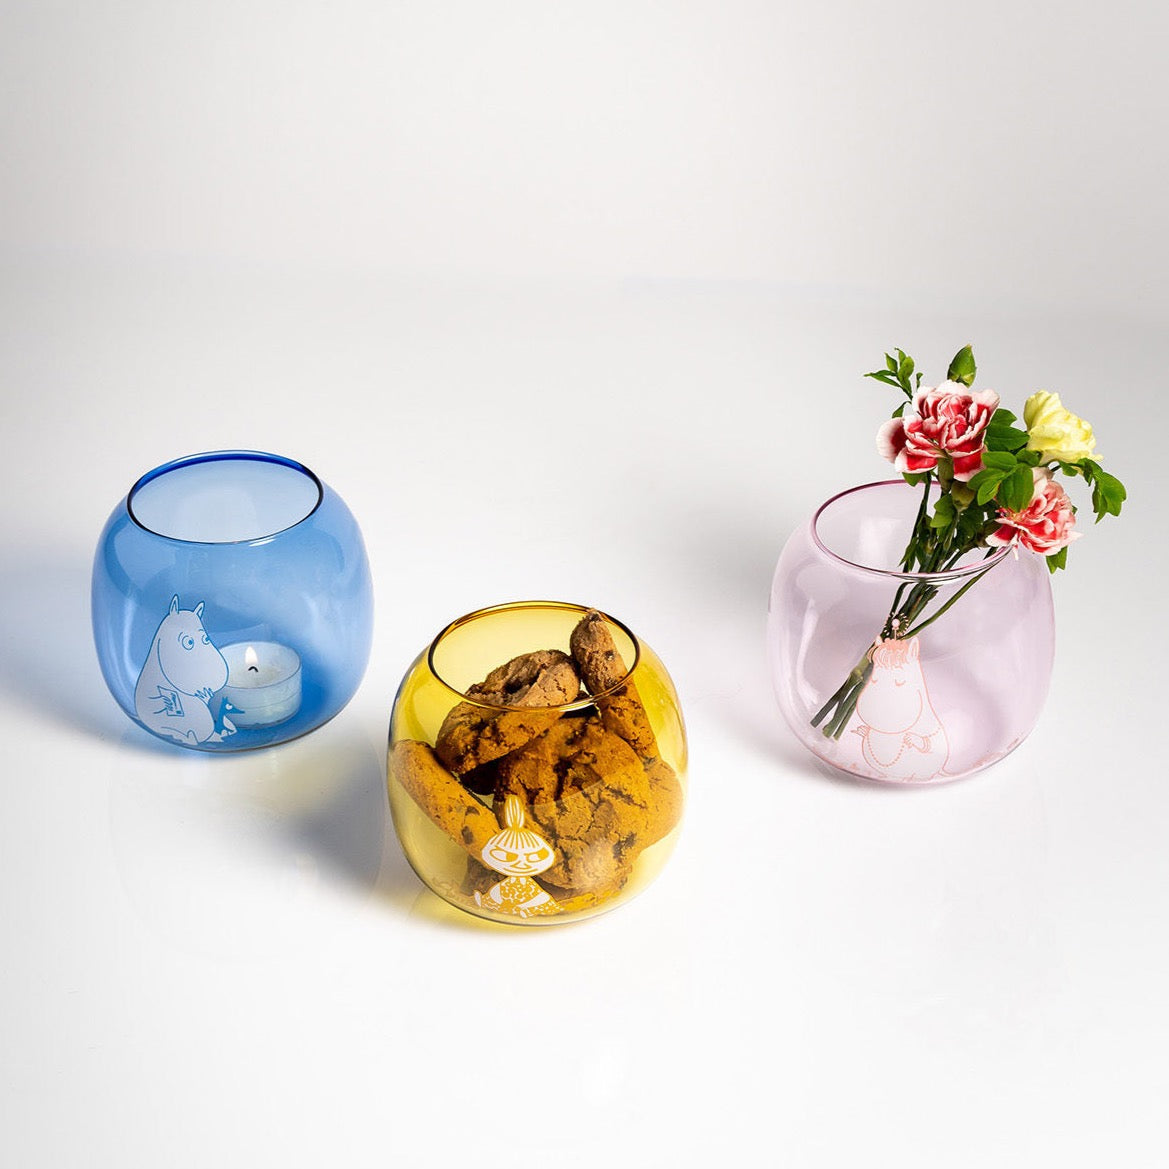 Moomin candleholders by Muurla, full of cookies, candles and flowers